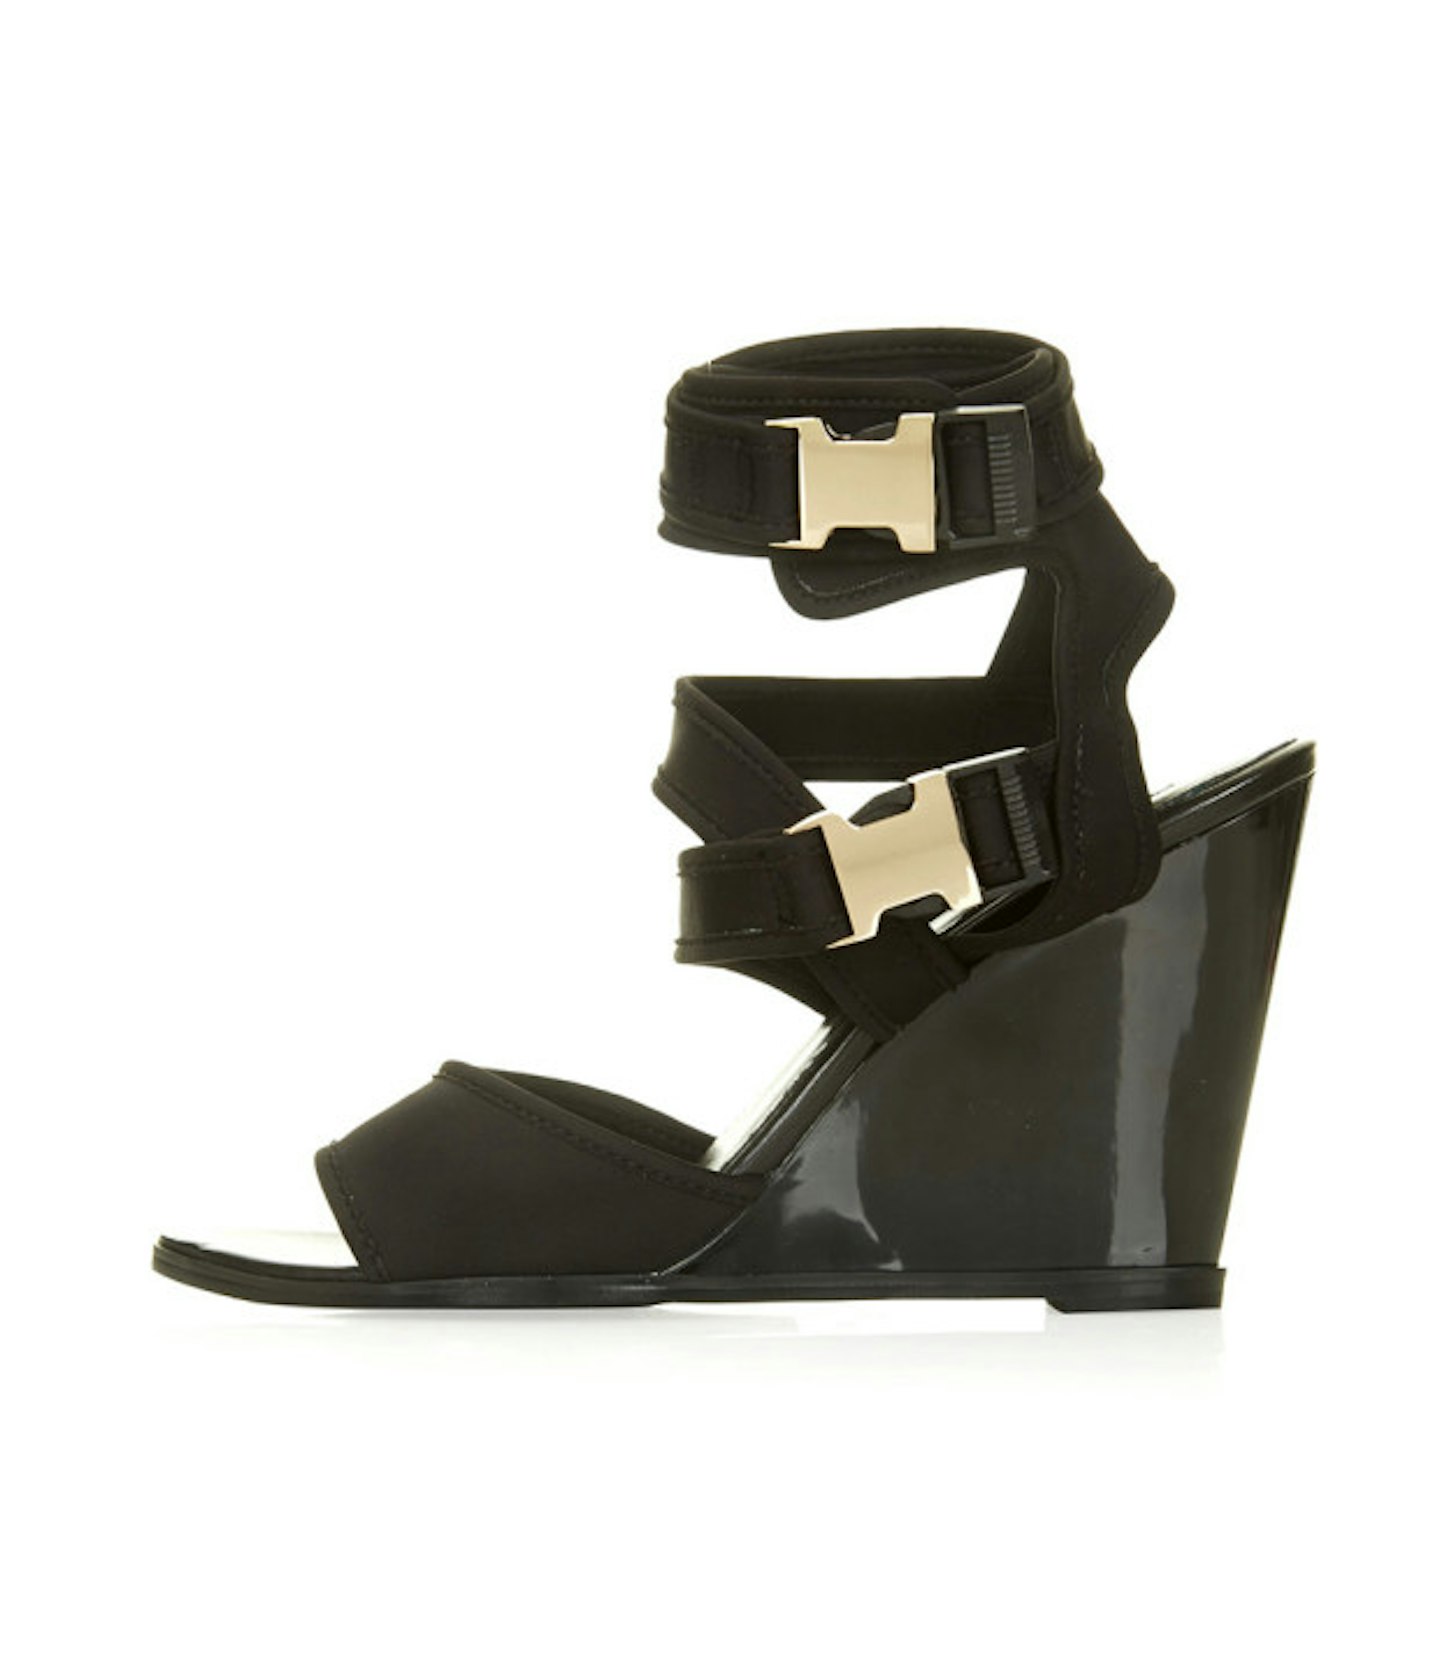 six-o-clock-shoes-topshop-patent-black-wedges-gold-buckles